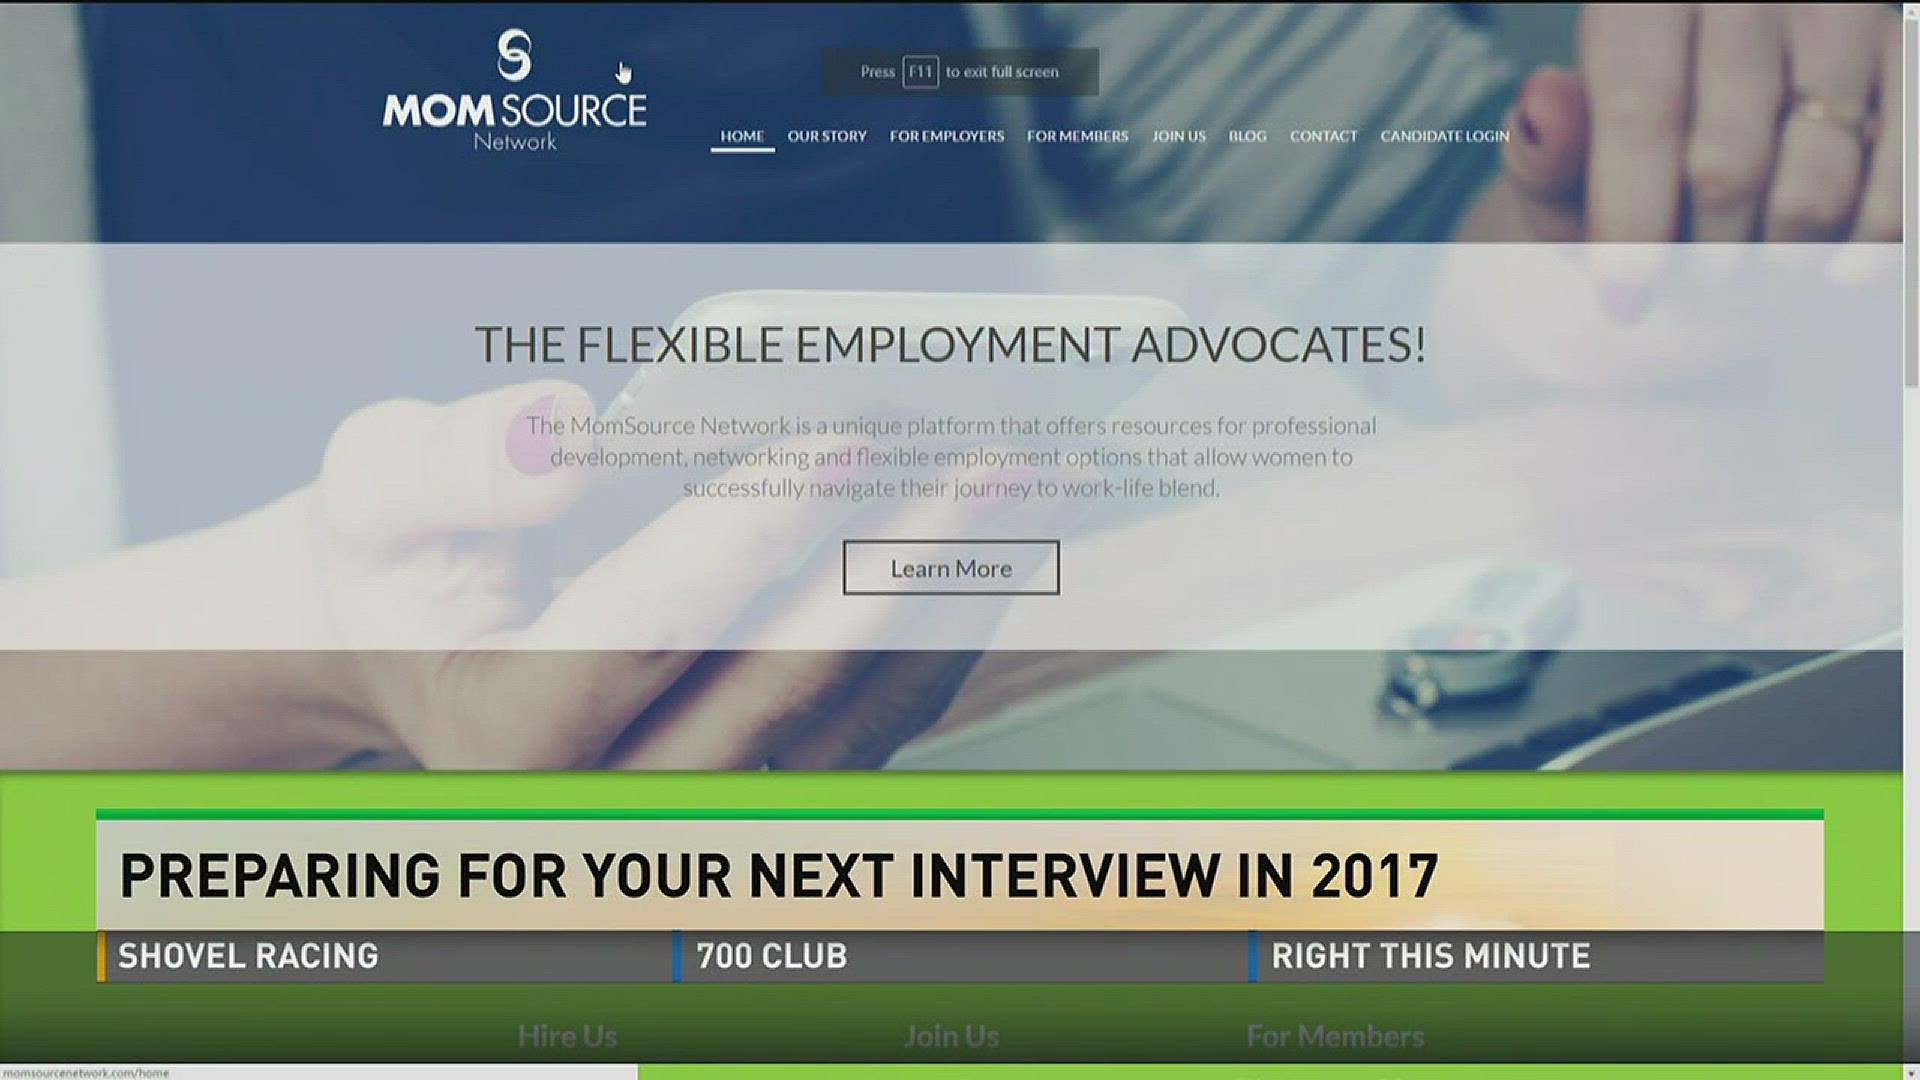 Preparing for Your Next Interview in 2017